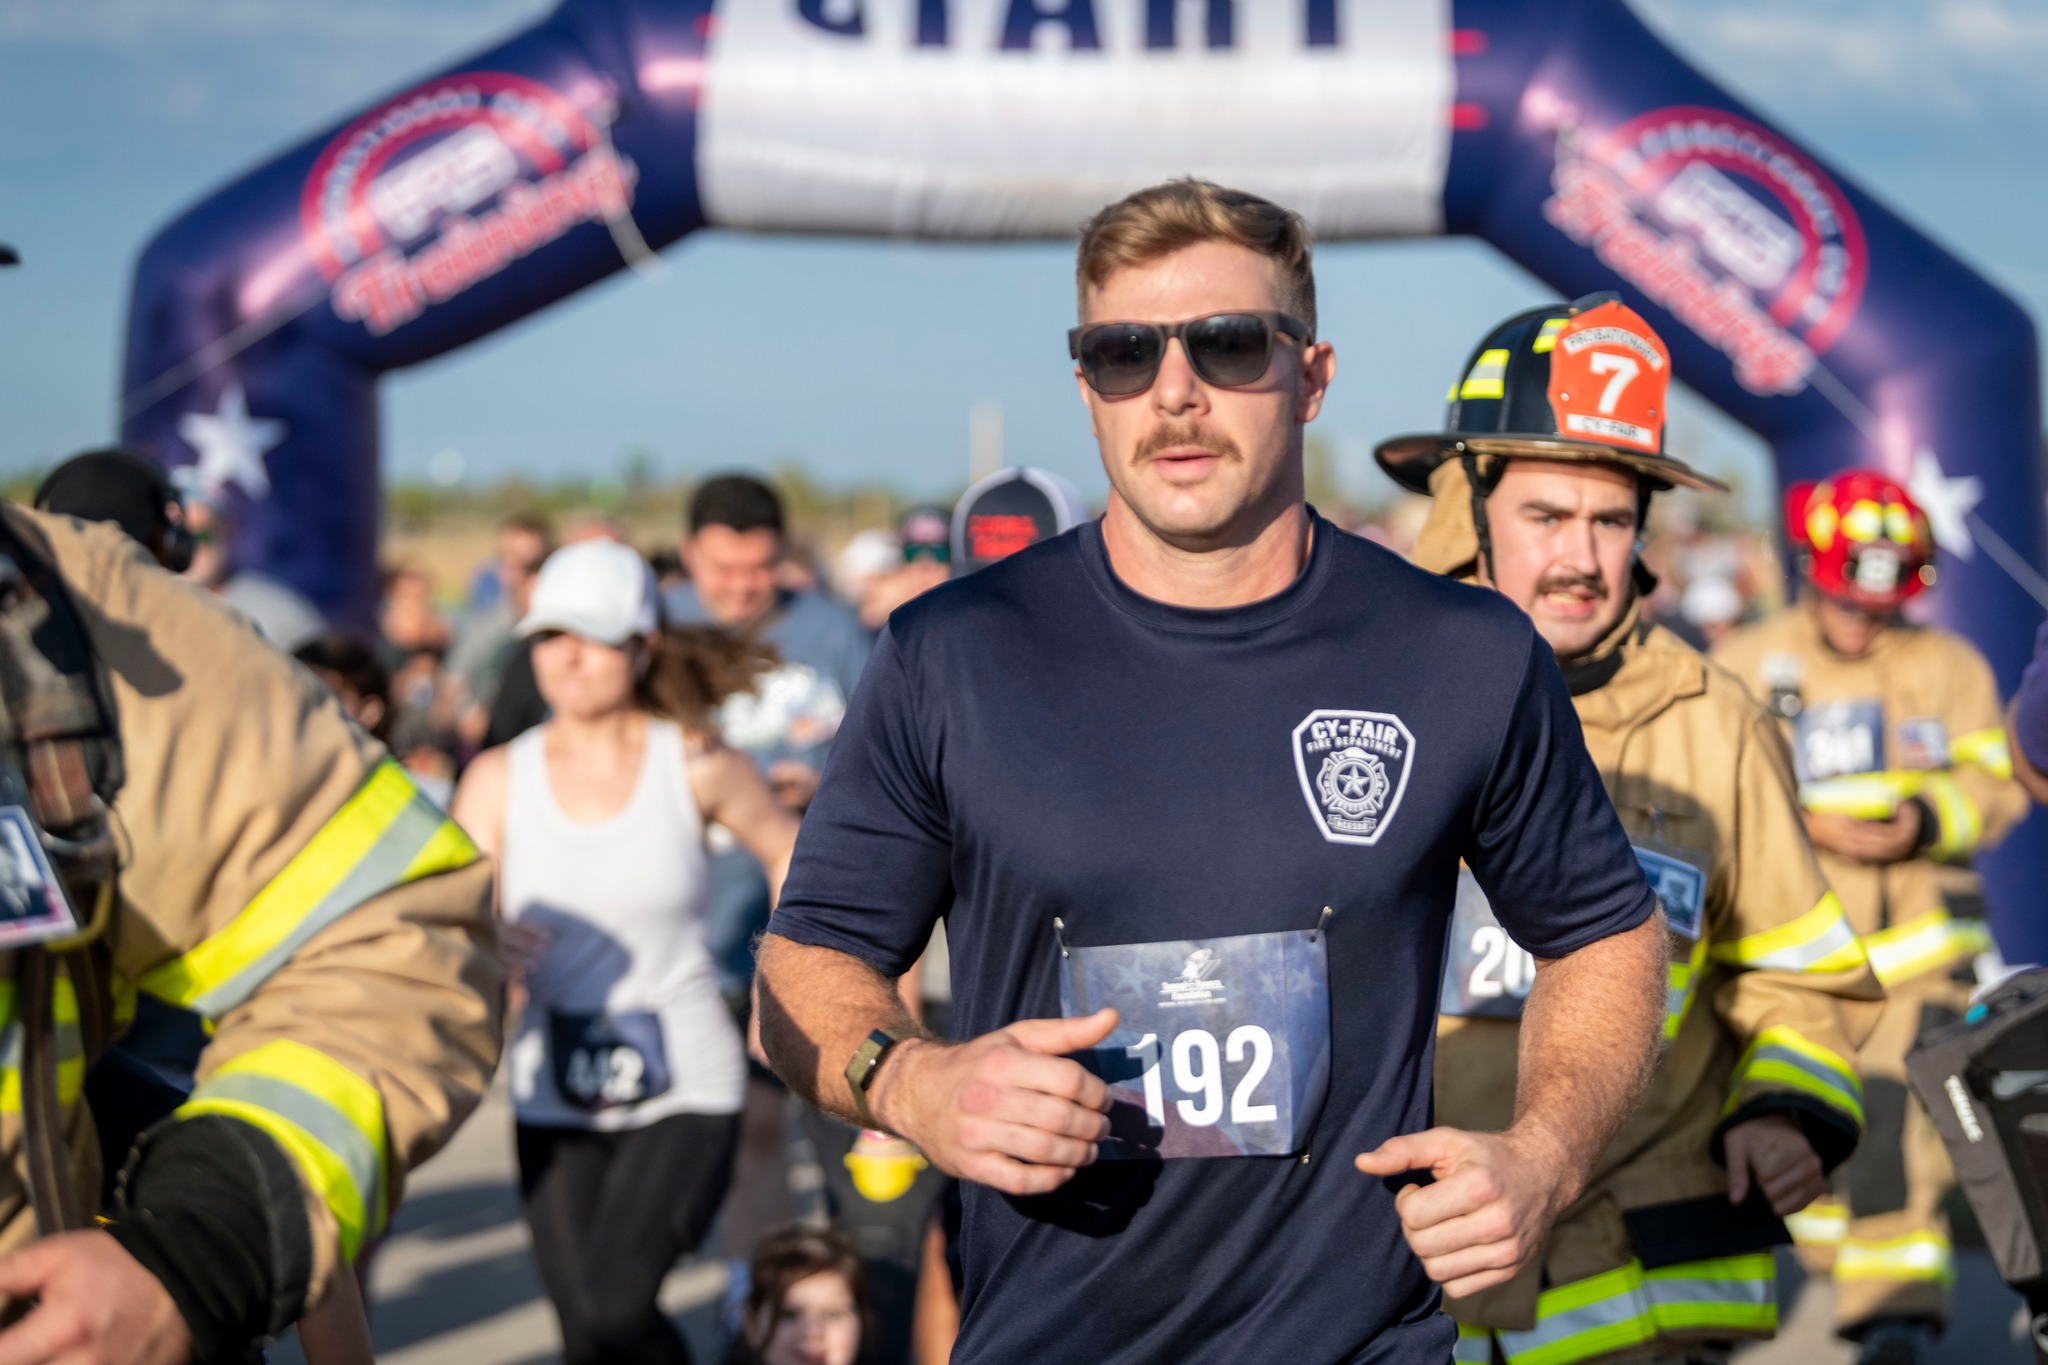 Registration Now Open for Third Annual Tunnel to Towers 5K Run & Walk in Cypress